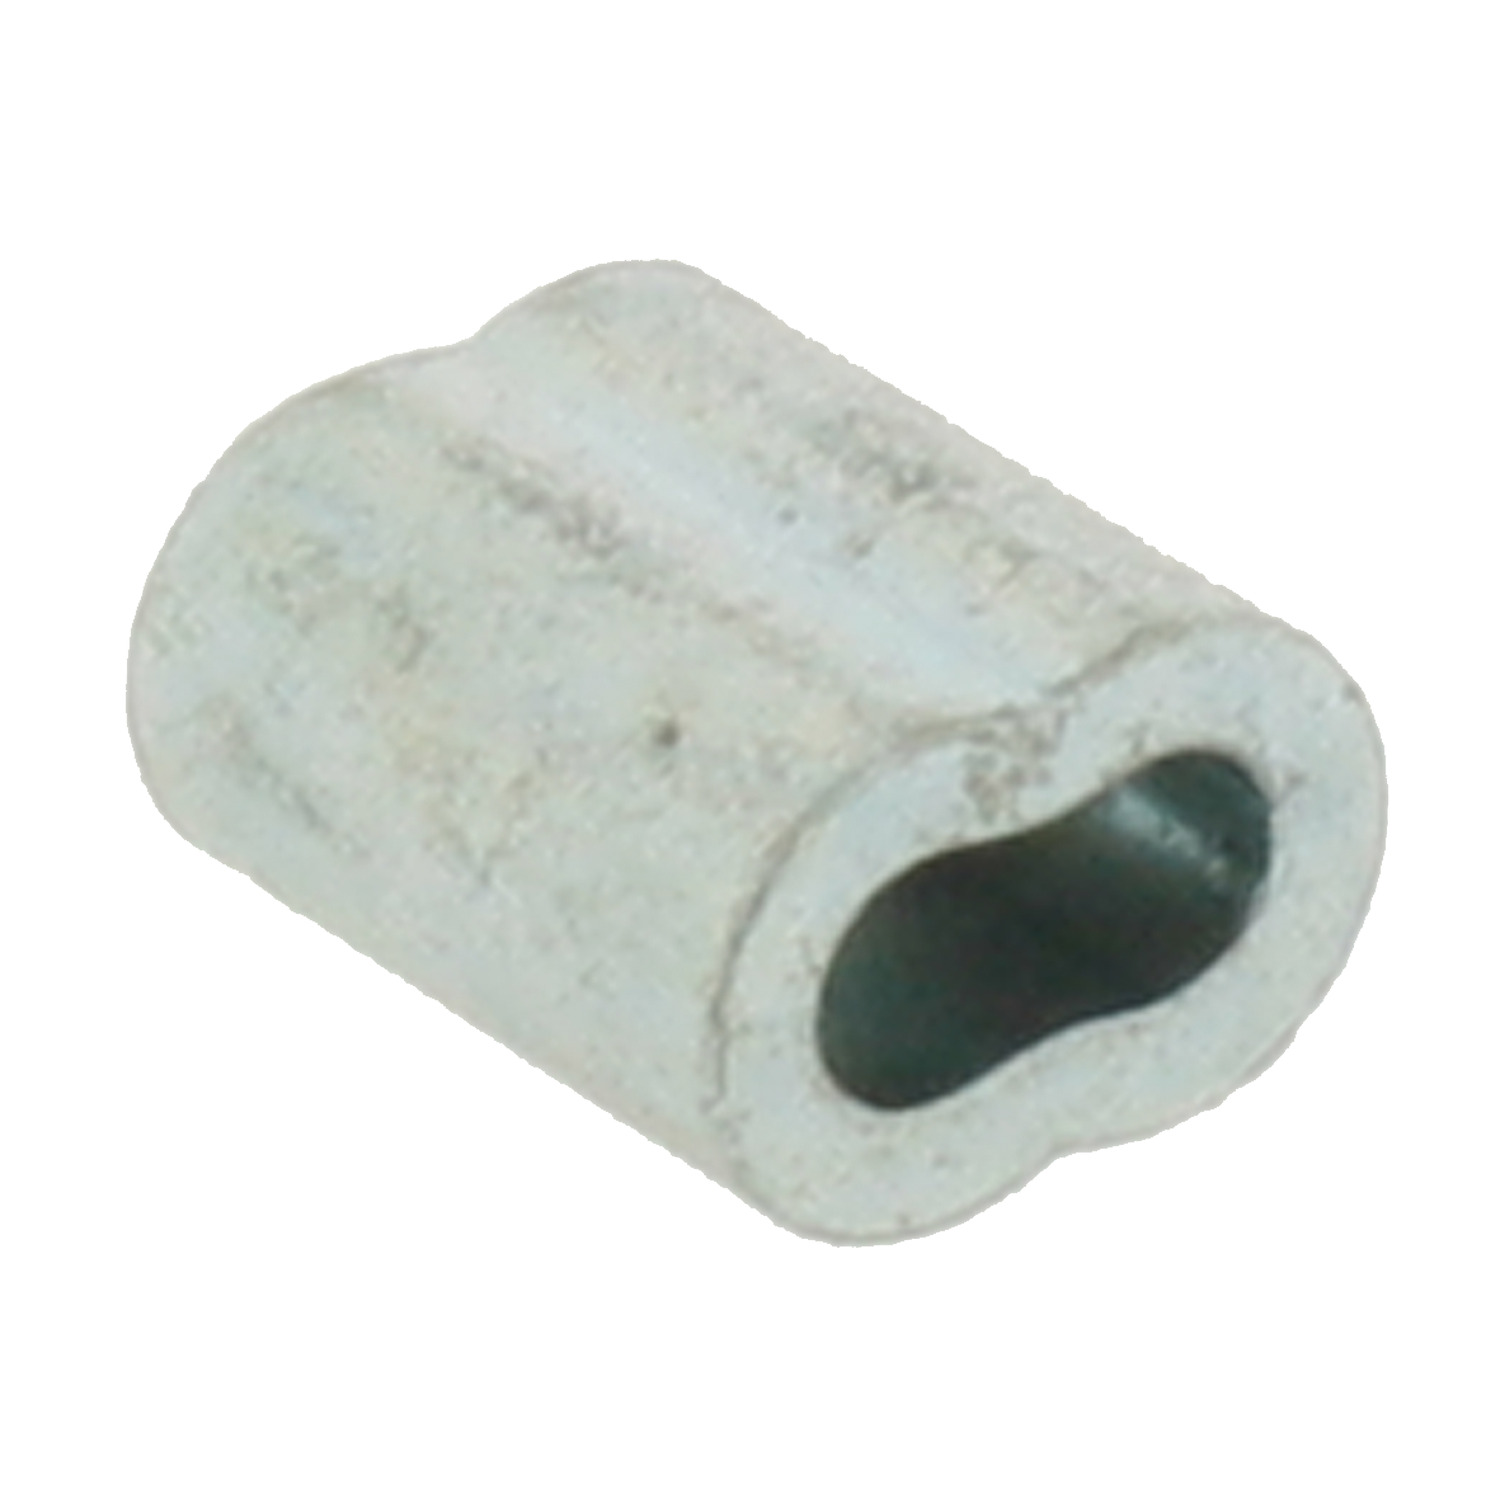 Product R1099, Cable Crimp Bushings  / 